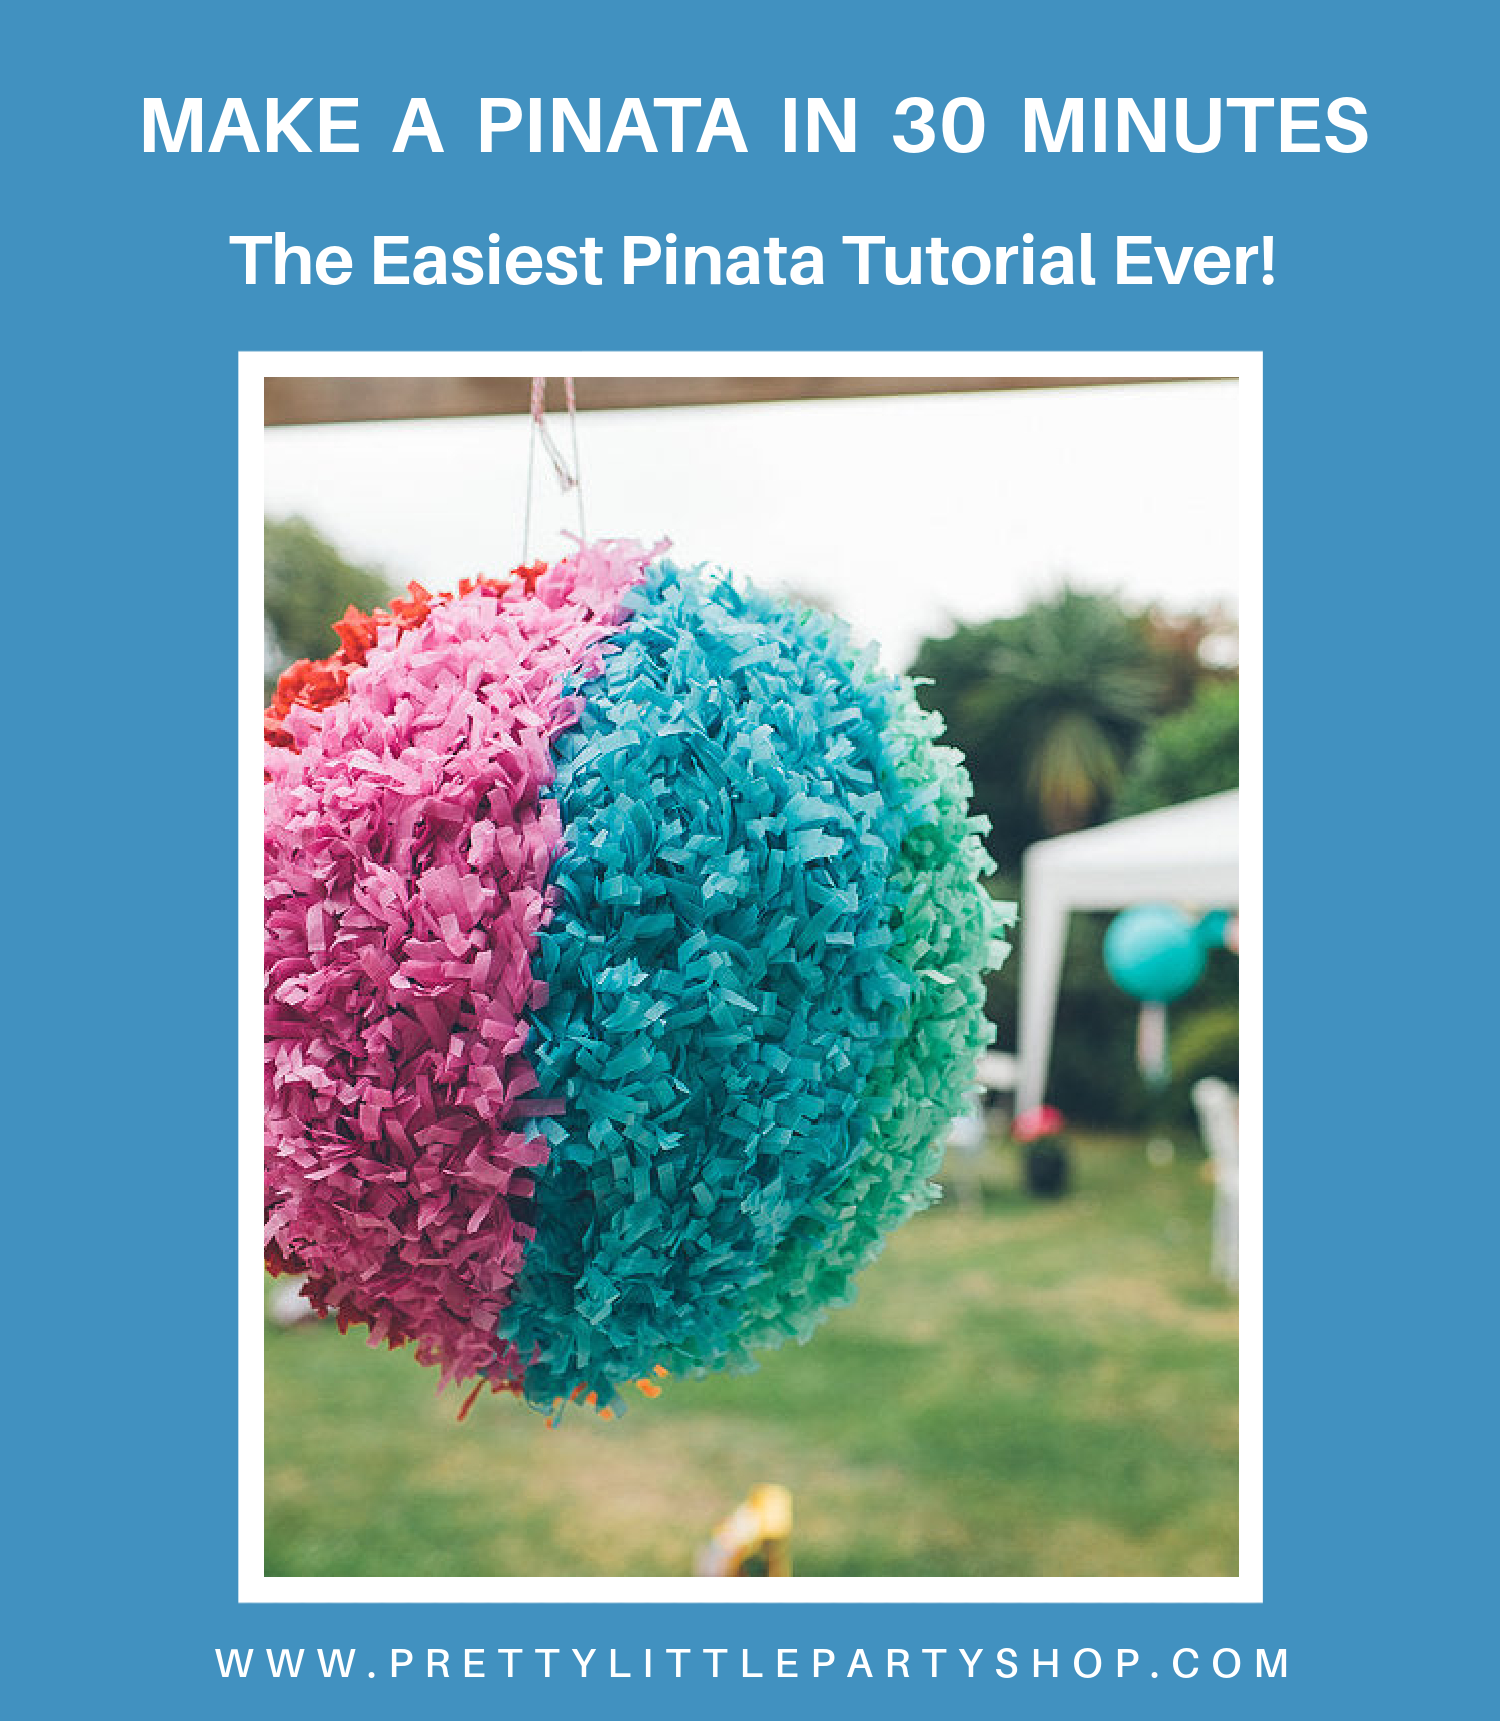 DIY Pinata in 30 minutes - Homemade Tutorial – Pretty Little Party Shop